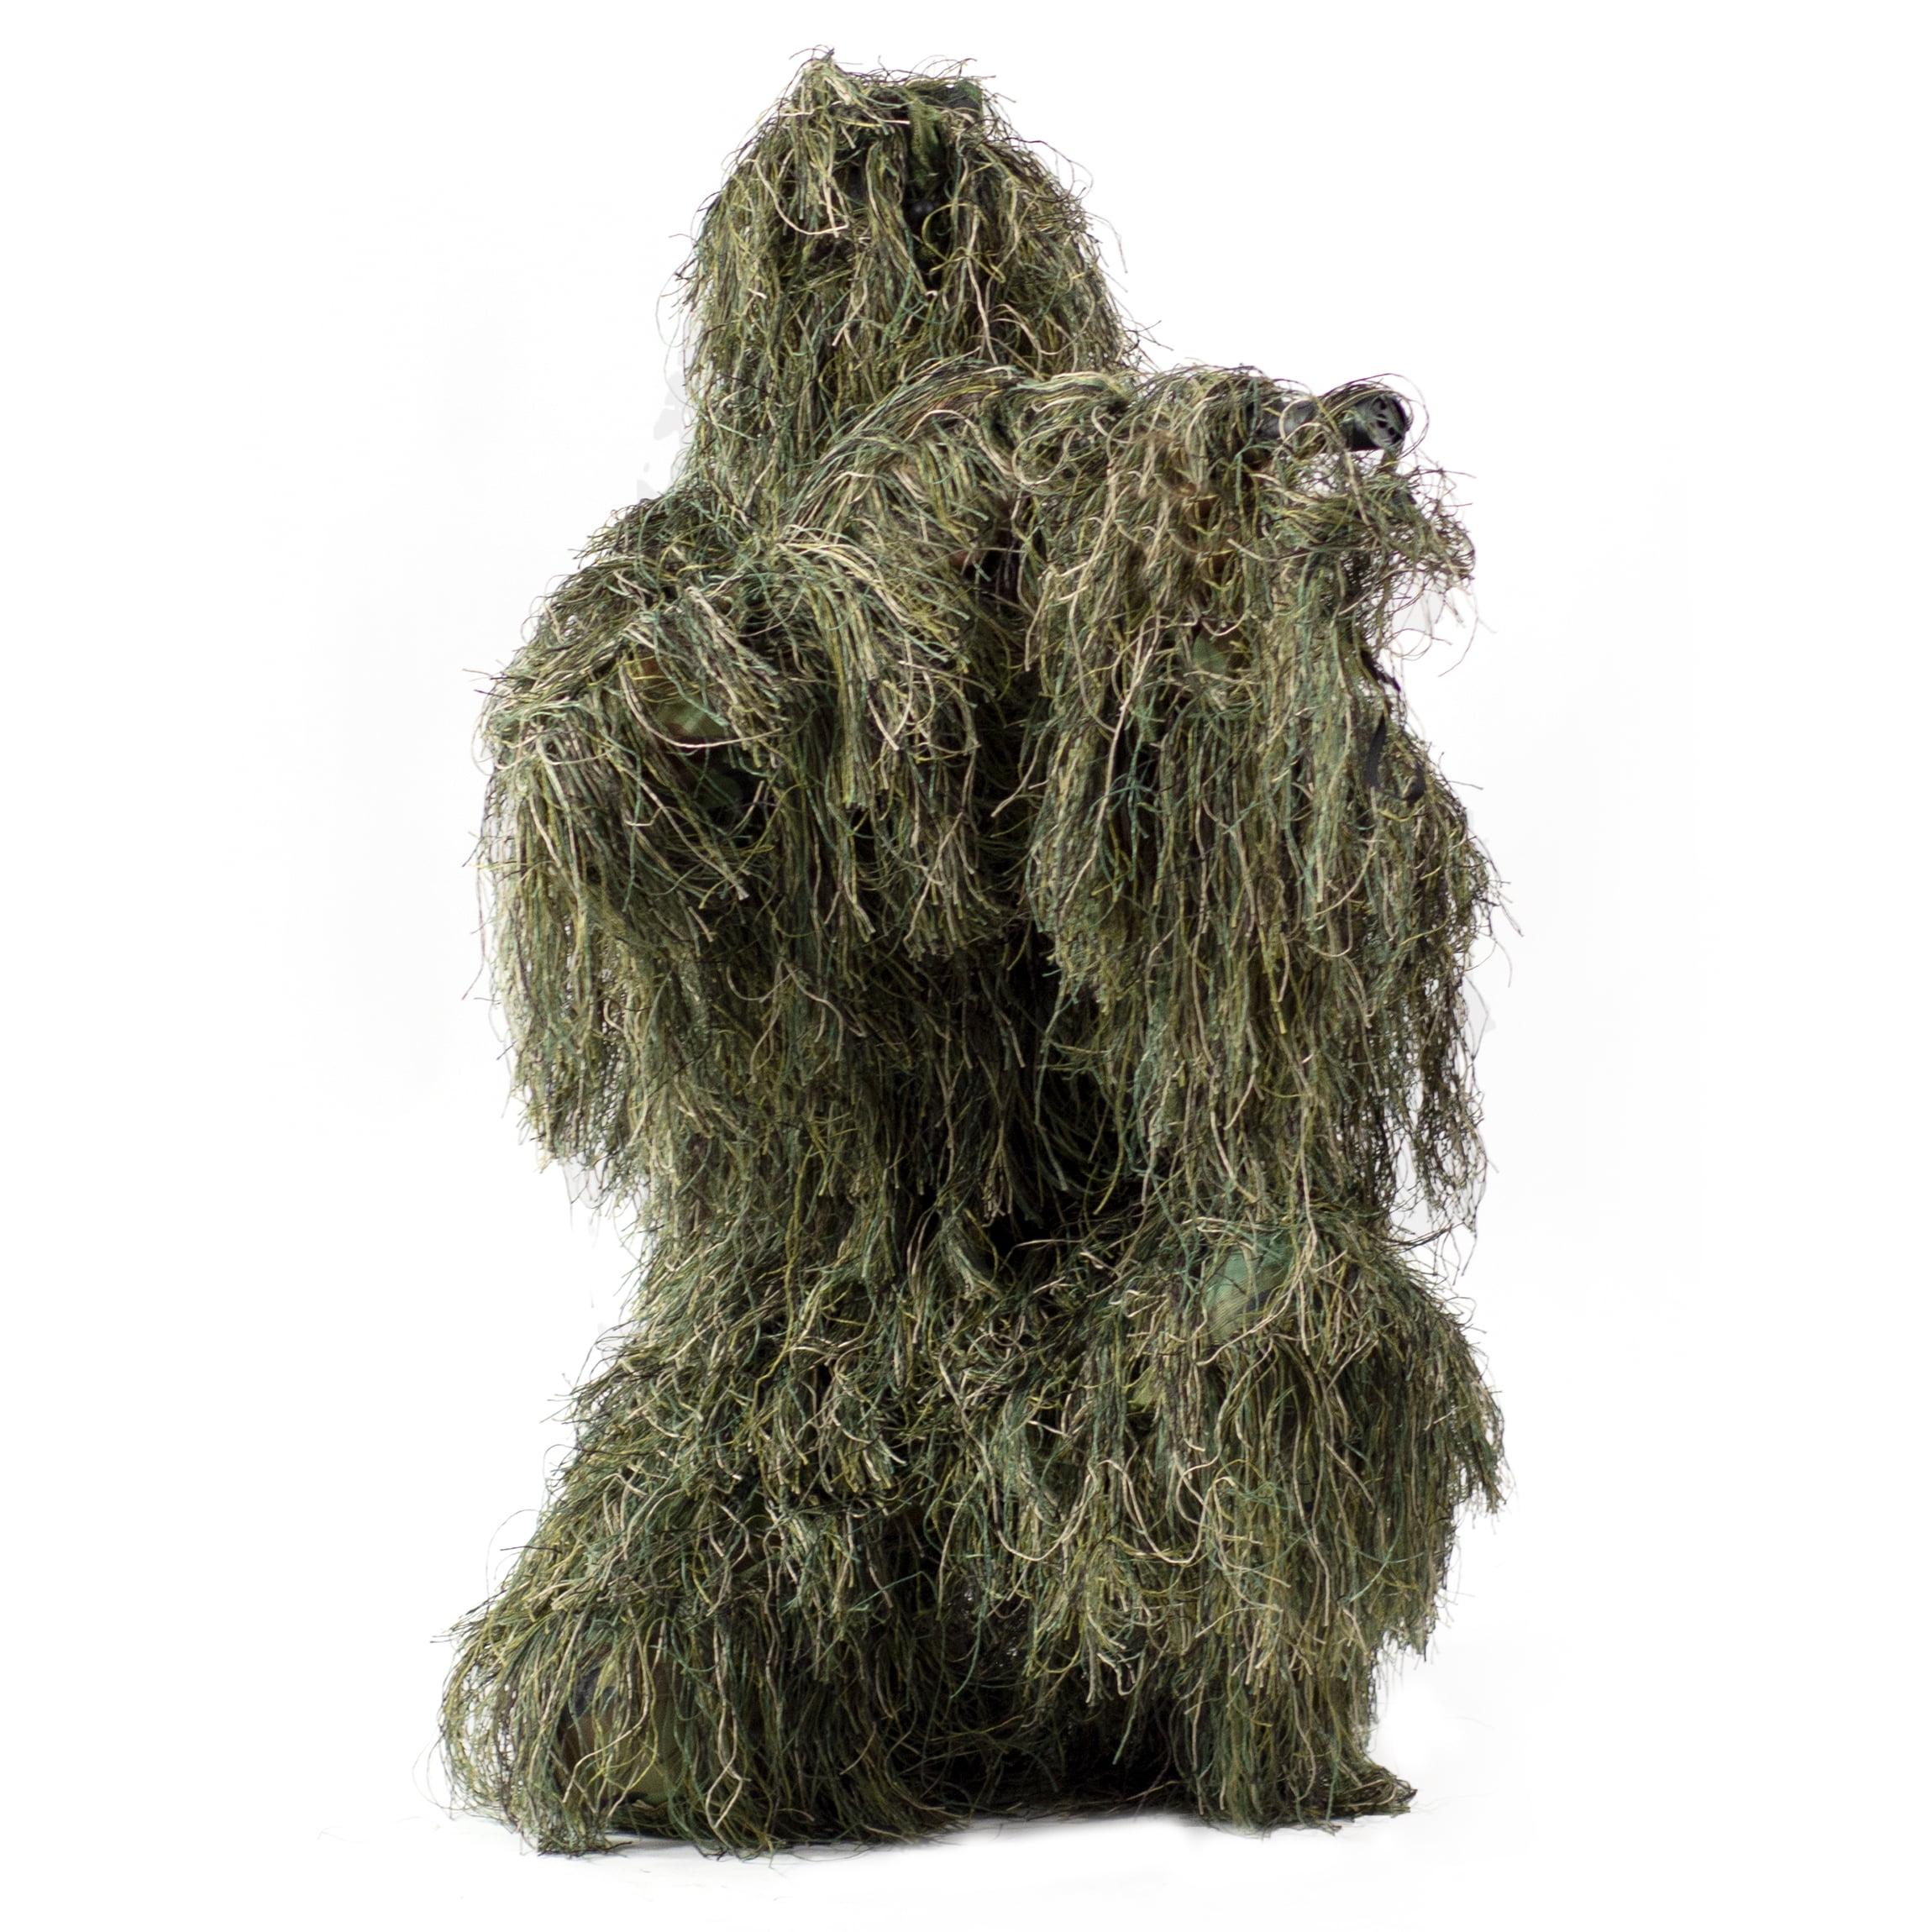 Woodland Gilly Suits Hooded M or L Ghillie Suit 3D Leafy Camo Hunting Suits 